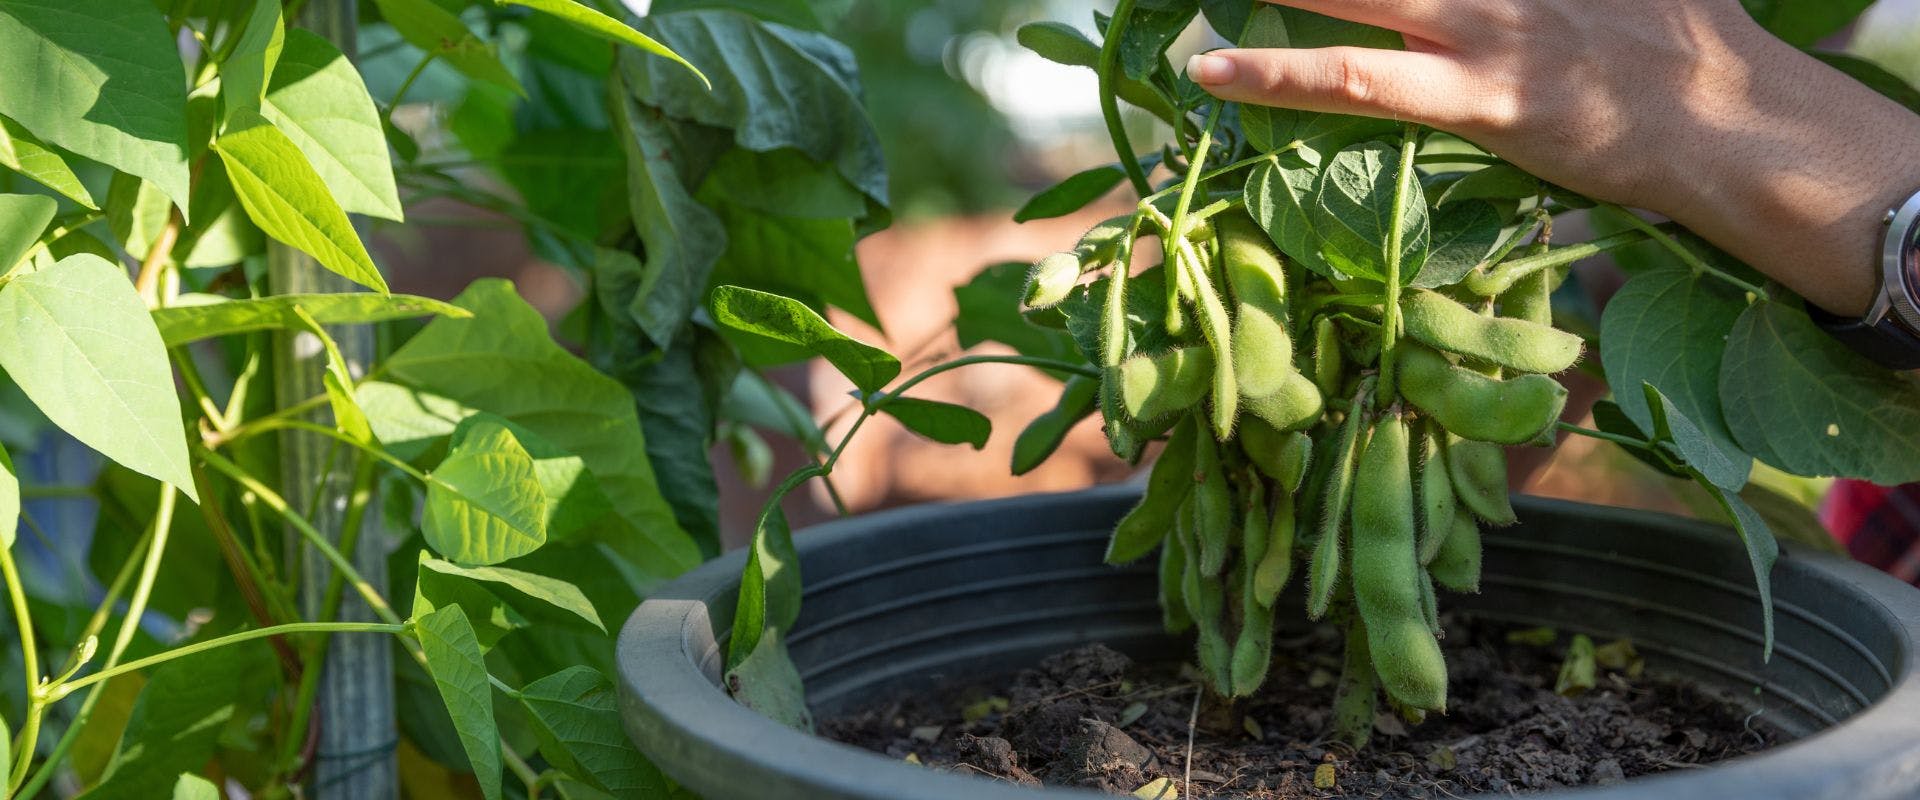 Edamame beans growing in a pot